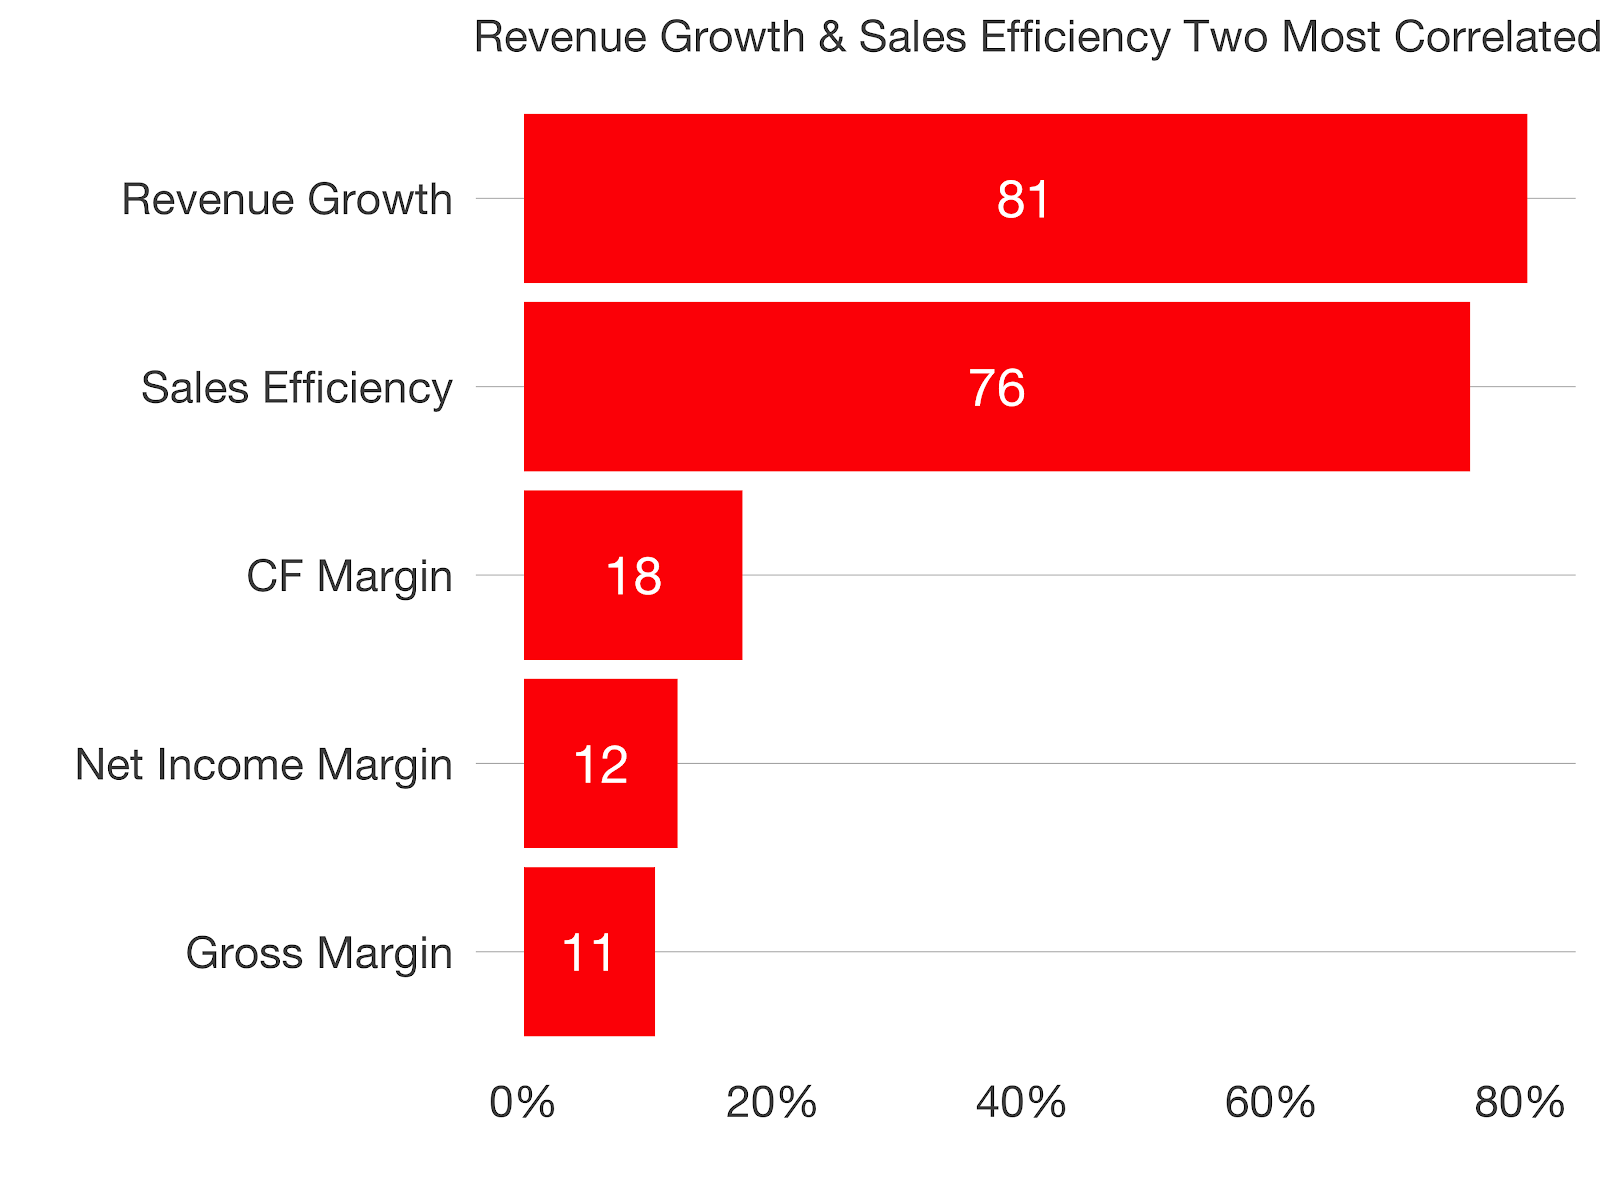 Revenue growth & Sales efficiency two most correlated factors to public SaaS valuations